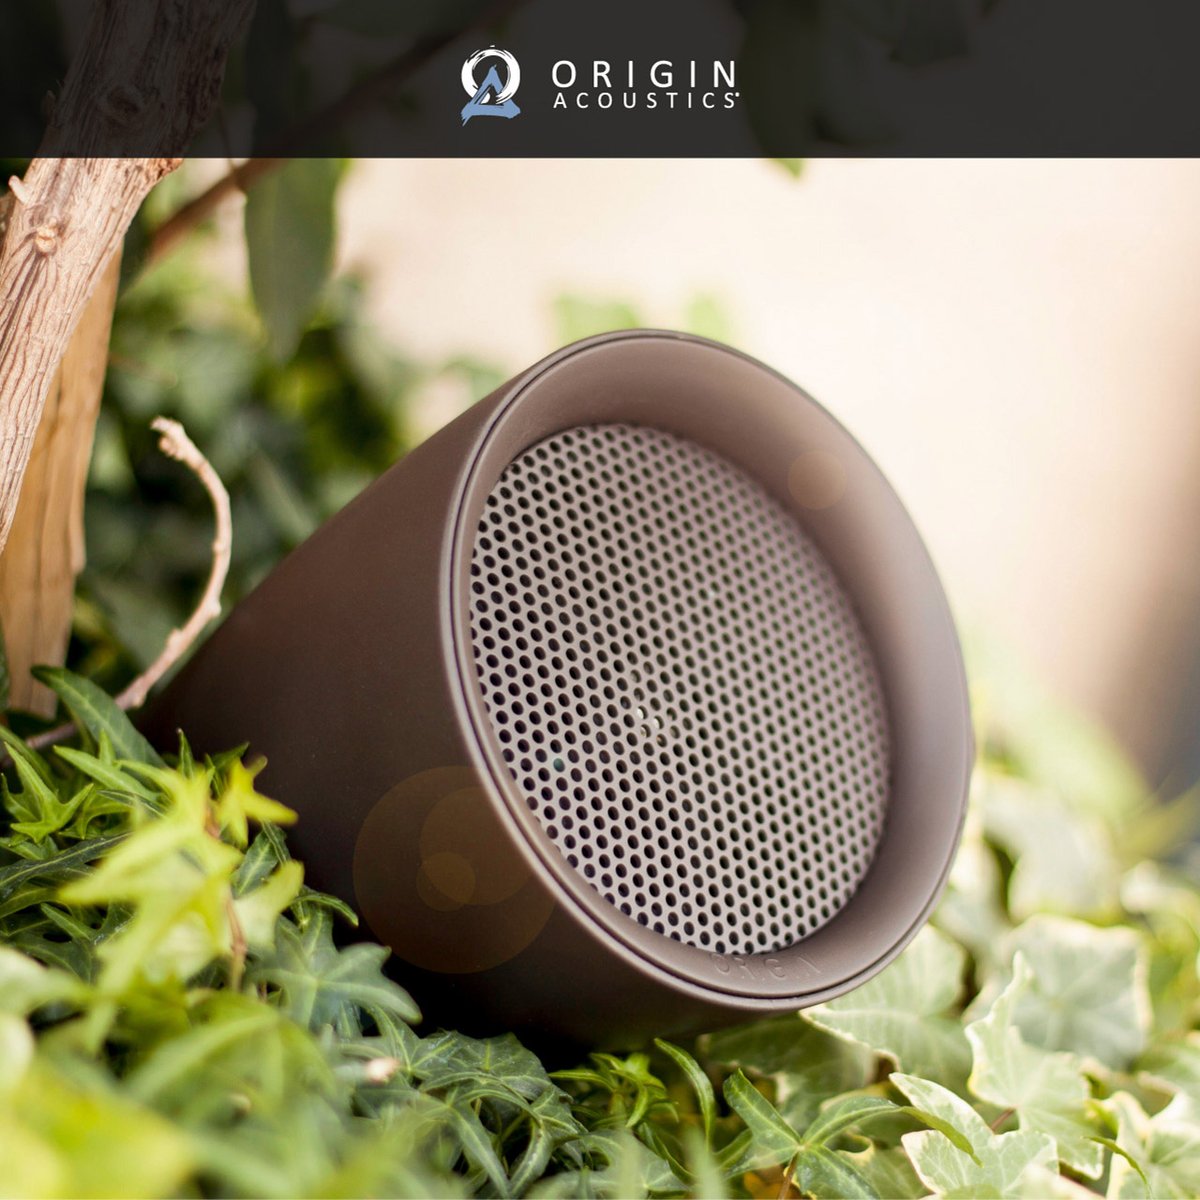 Summer is here, and trust that our speakers can take the heat! 😎☀️

Deliver the best-sounding summer with any of our outdoor audio offerings.

What will be your song of the season?

#SummerTunes #OutdoorSpeakers #LandscapeAudio #OriginAcoustics